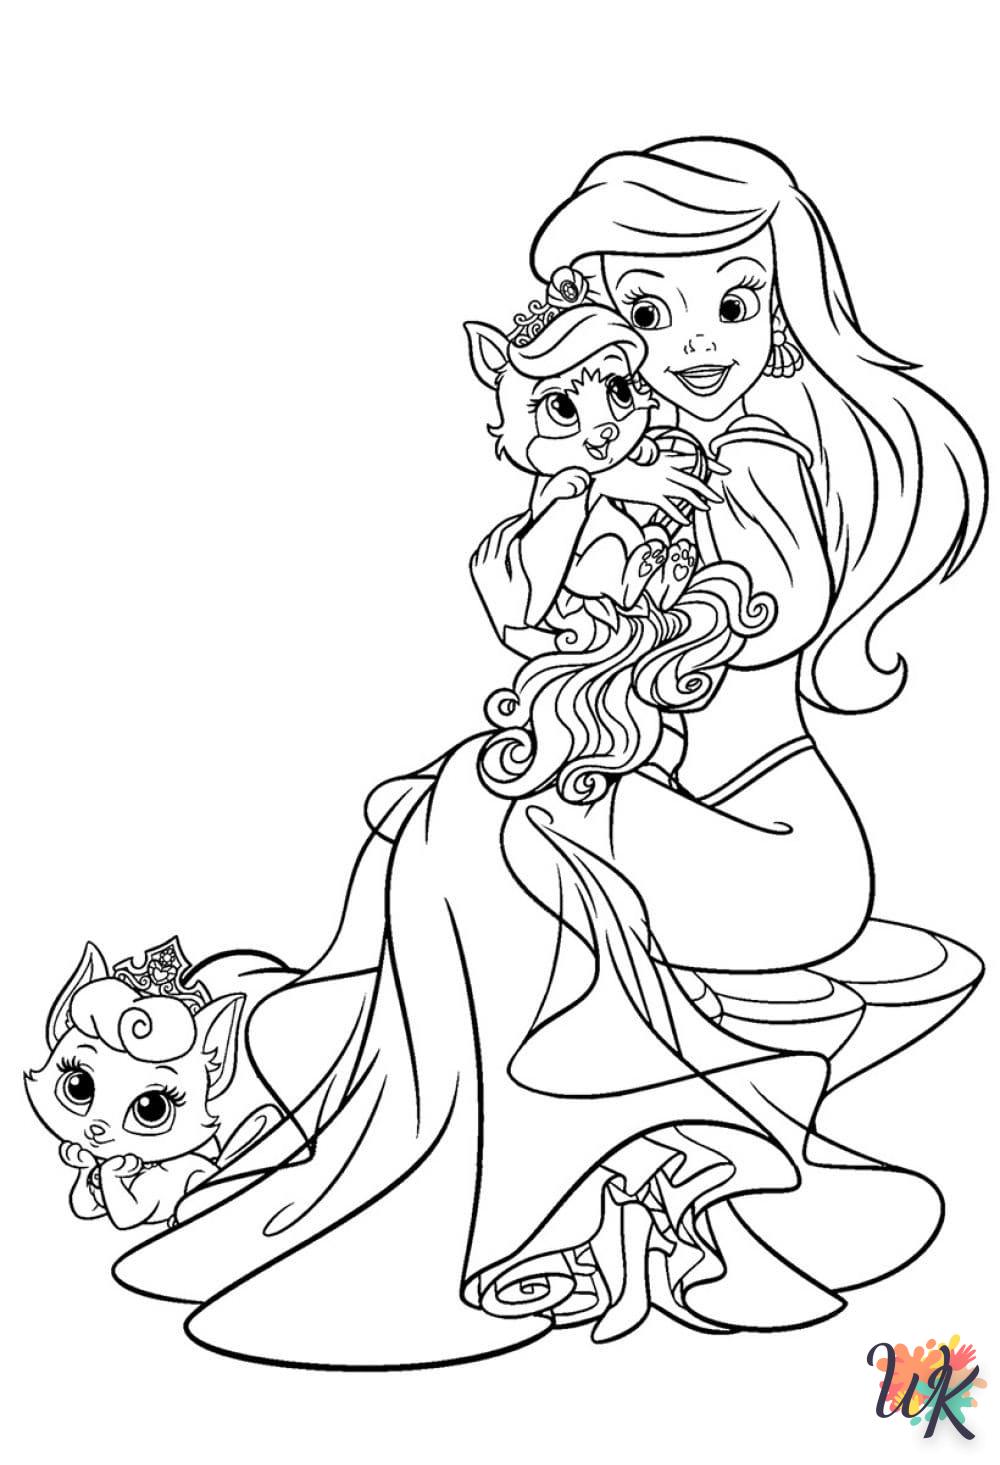 Disney coloring to download